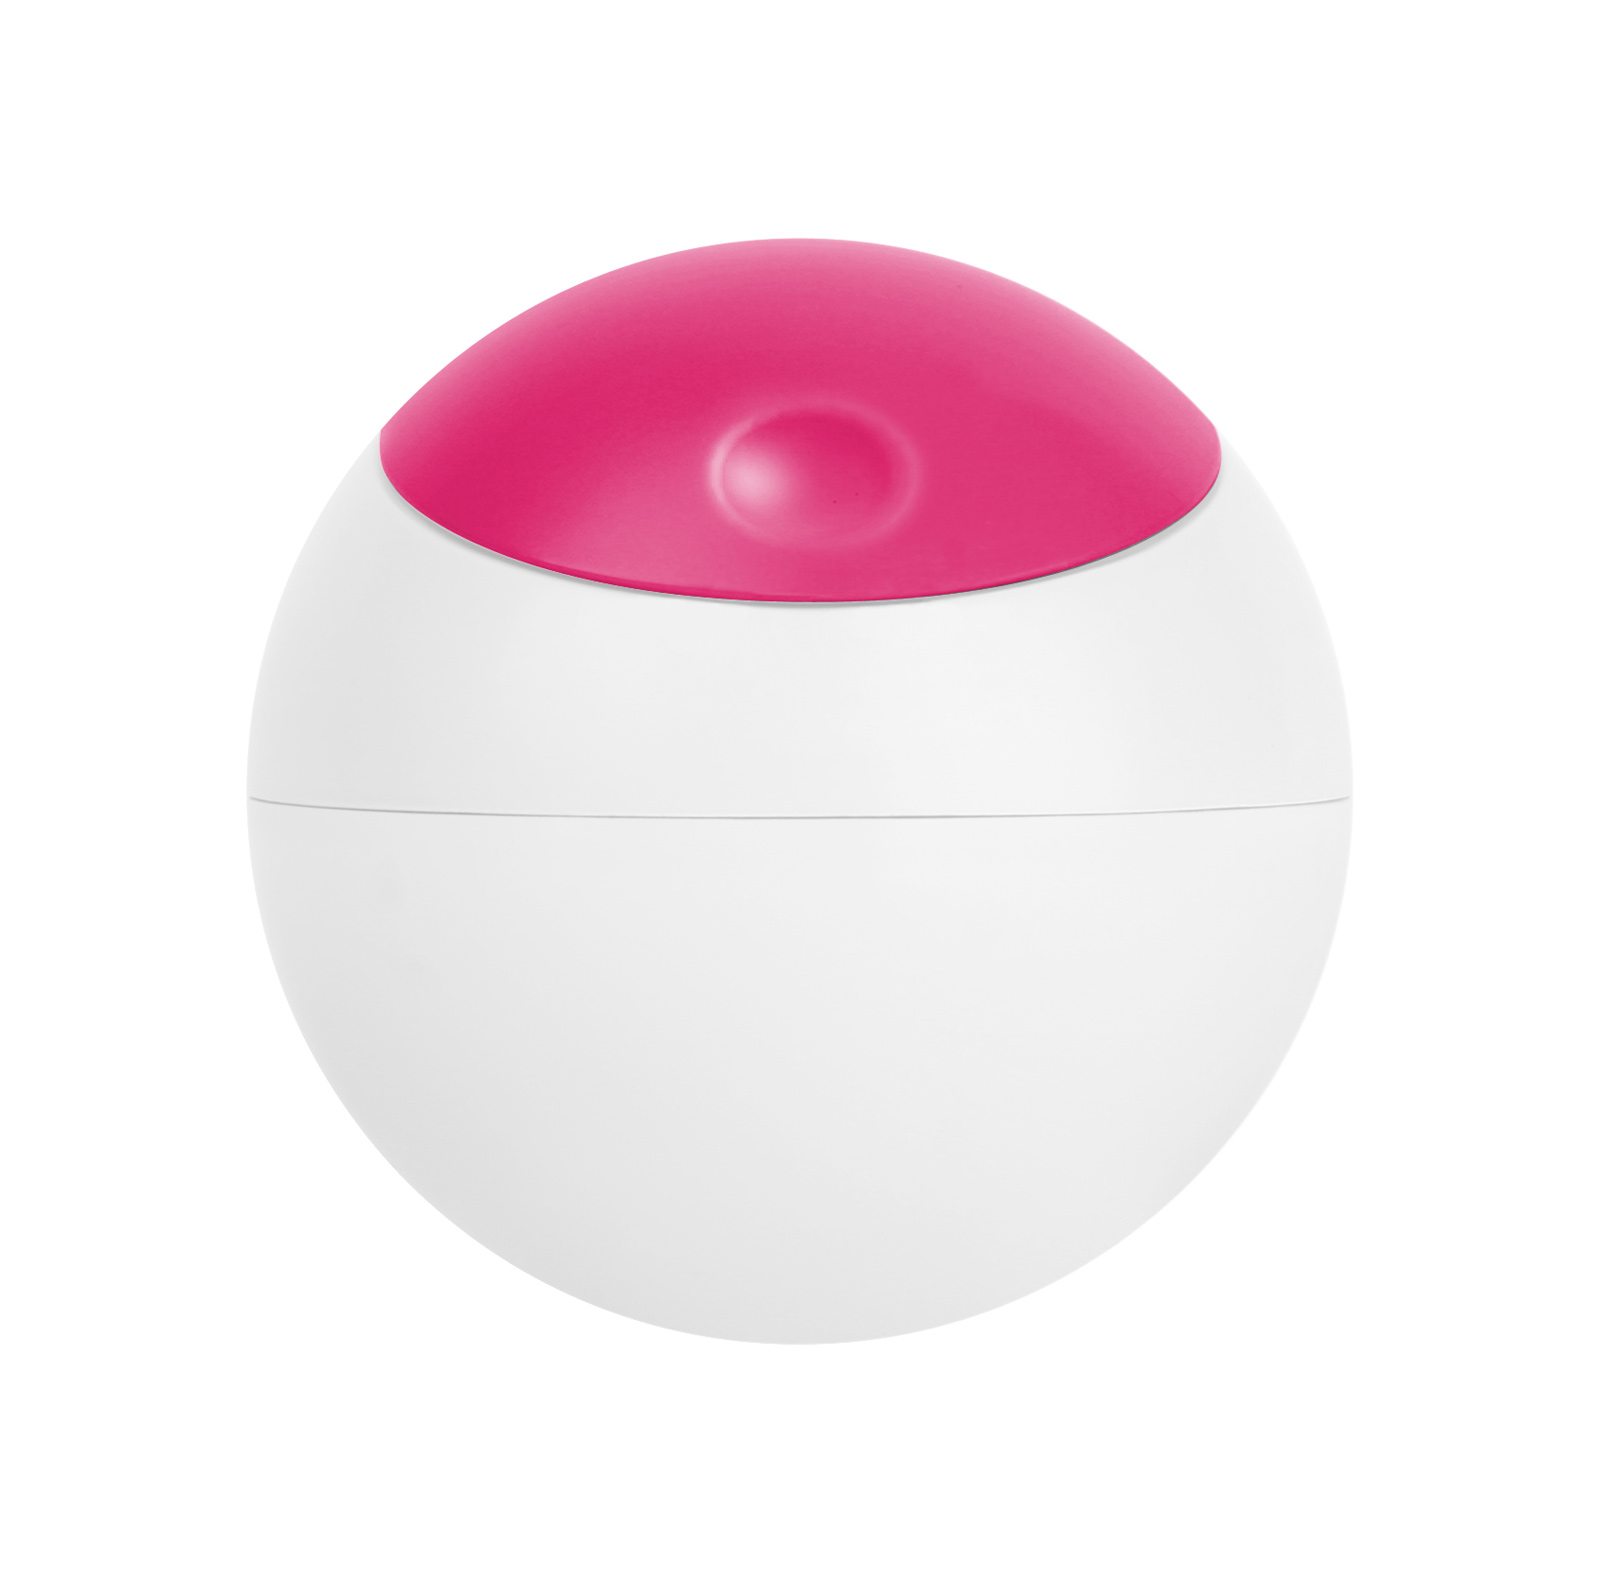 Boon - Snack Ball - Pink/White